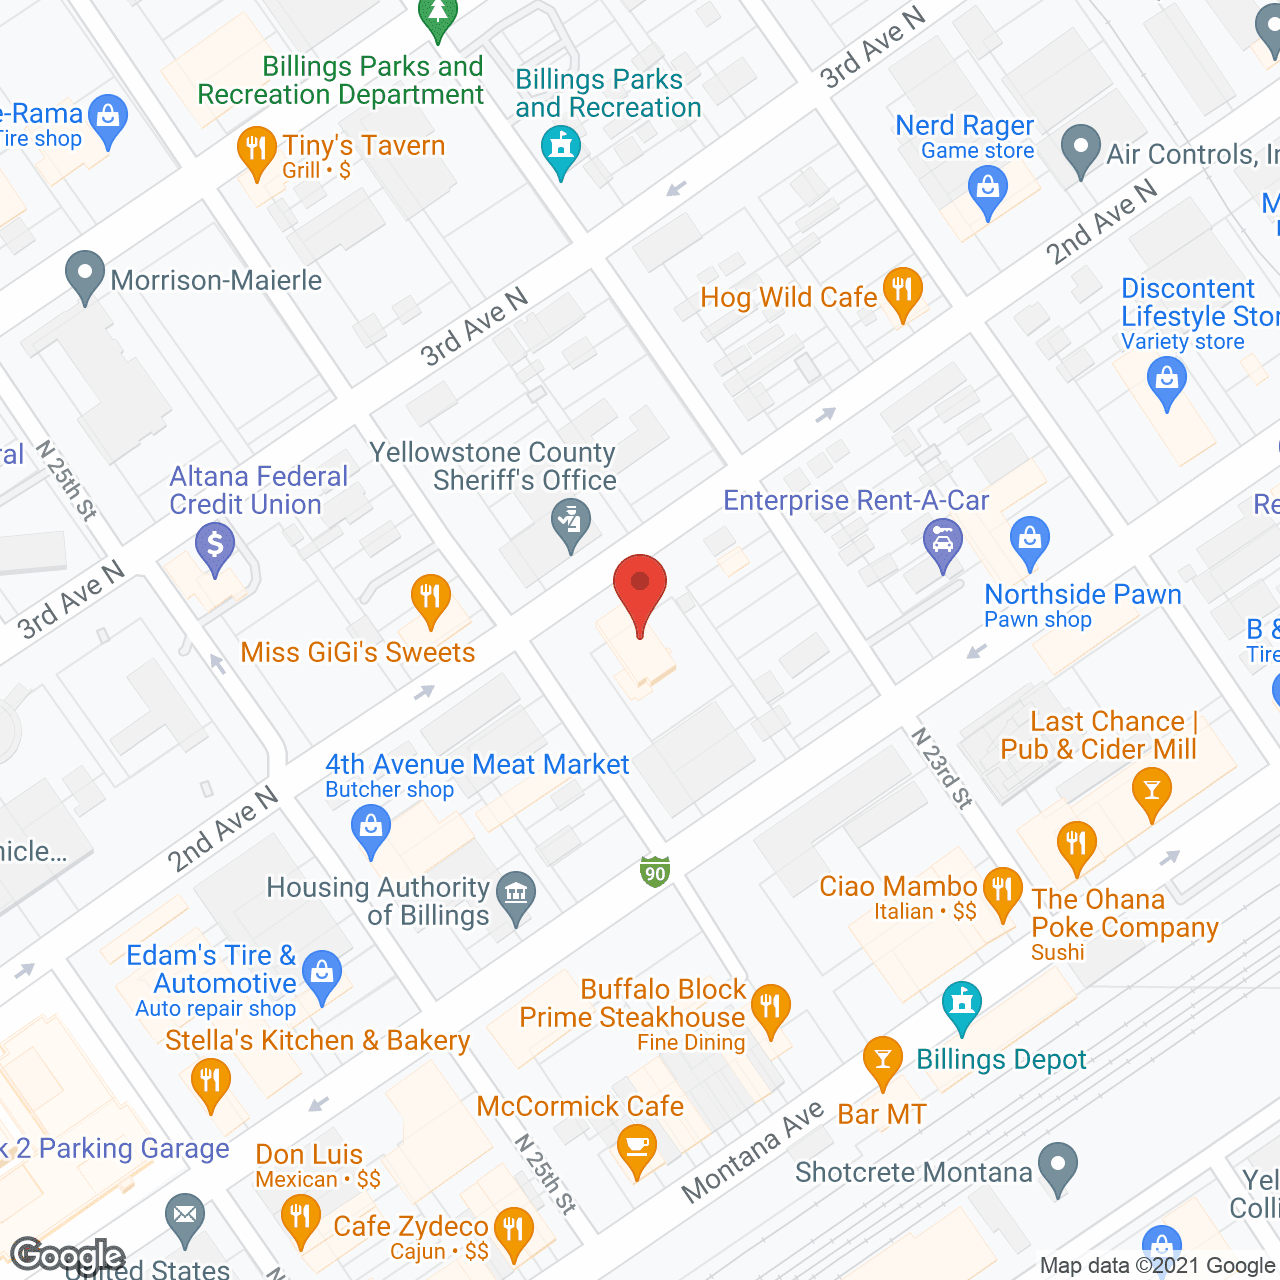 Sage Tower Retirement Apts in google map